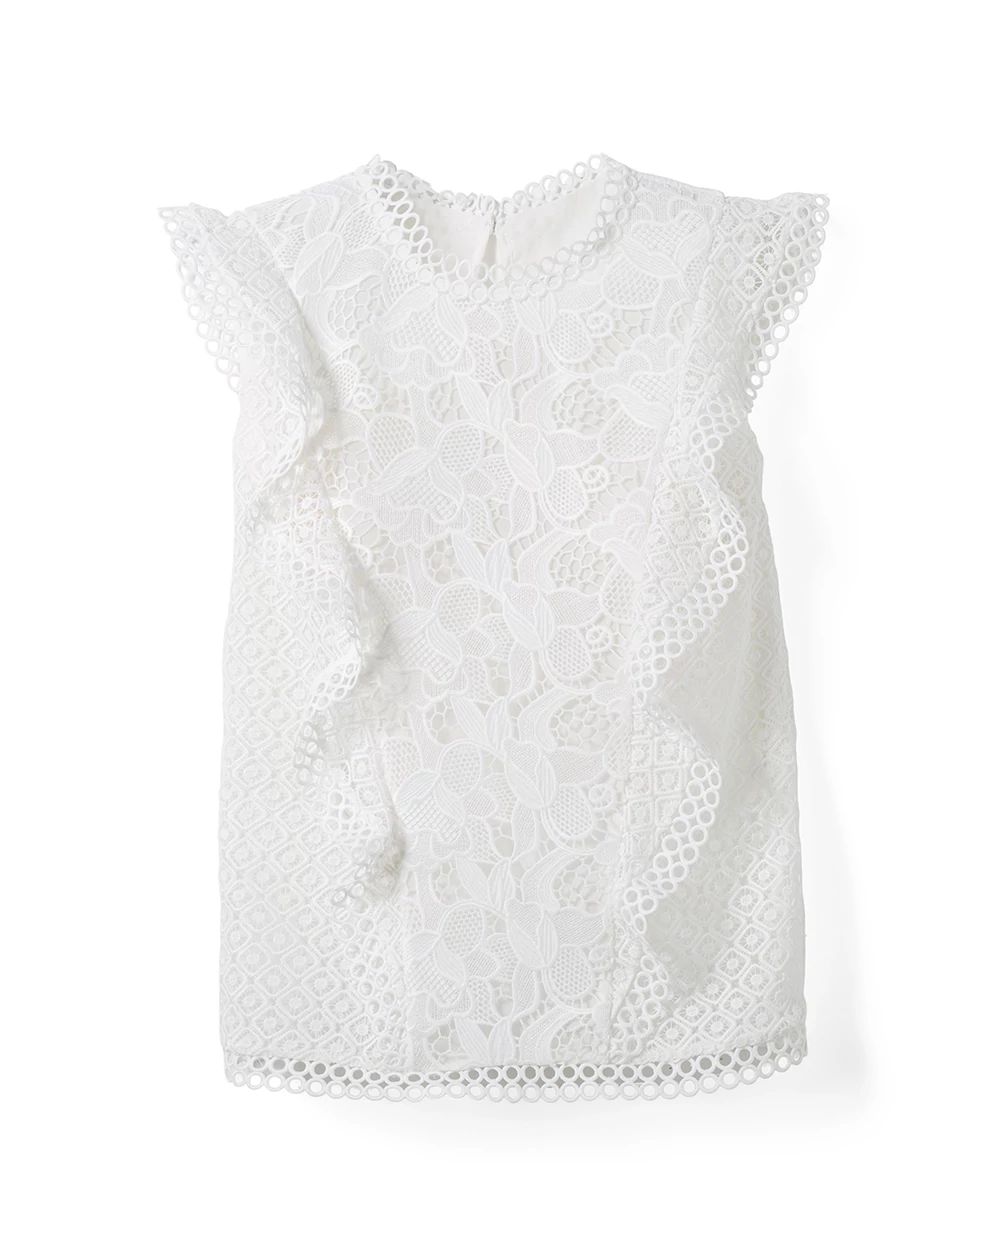 Ruffle & Lace Sleeveless Top click to view larger image.